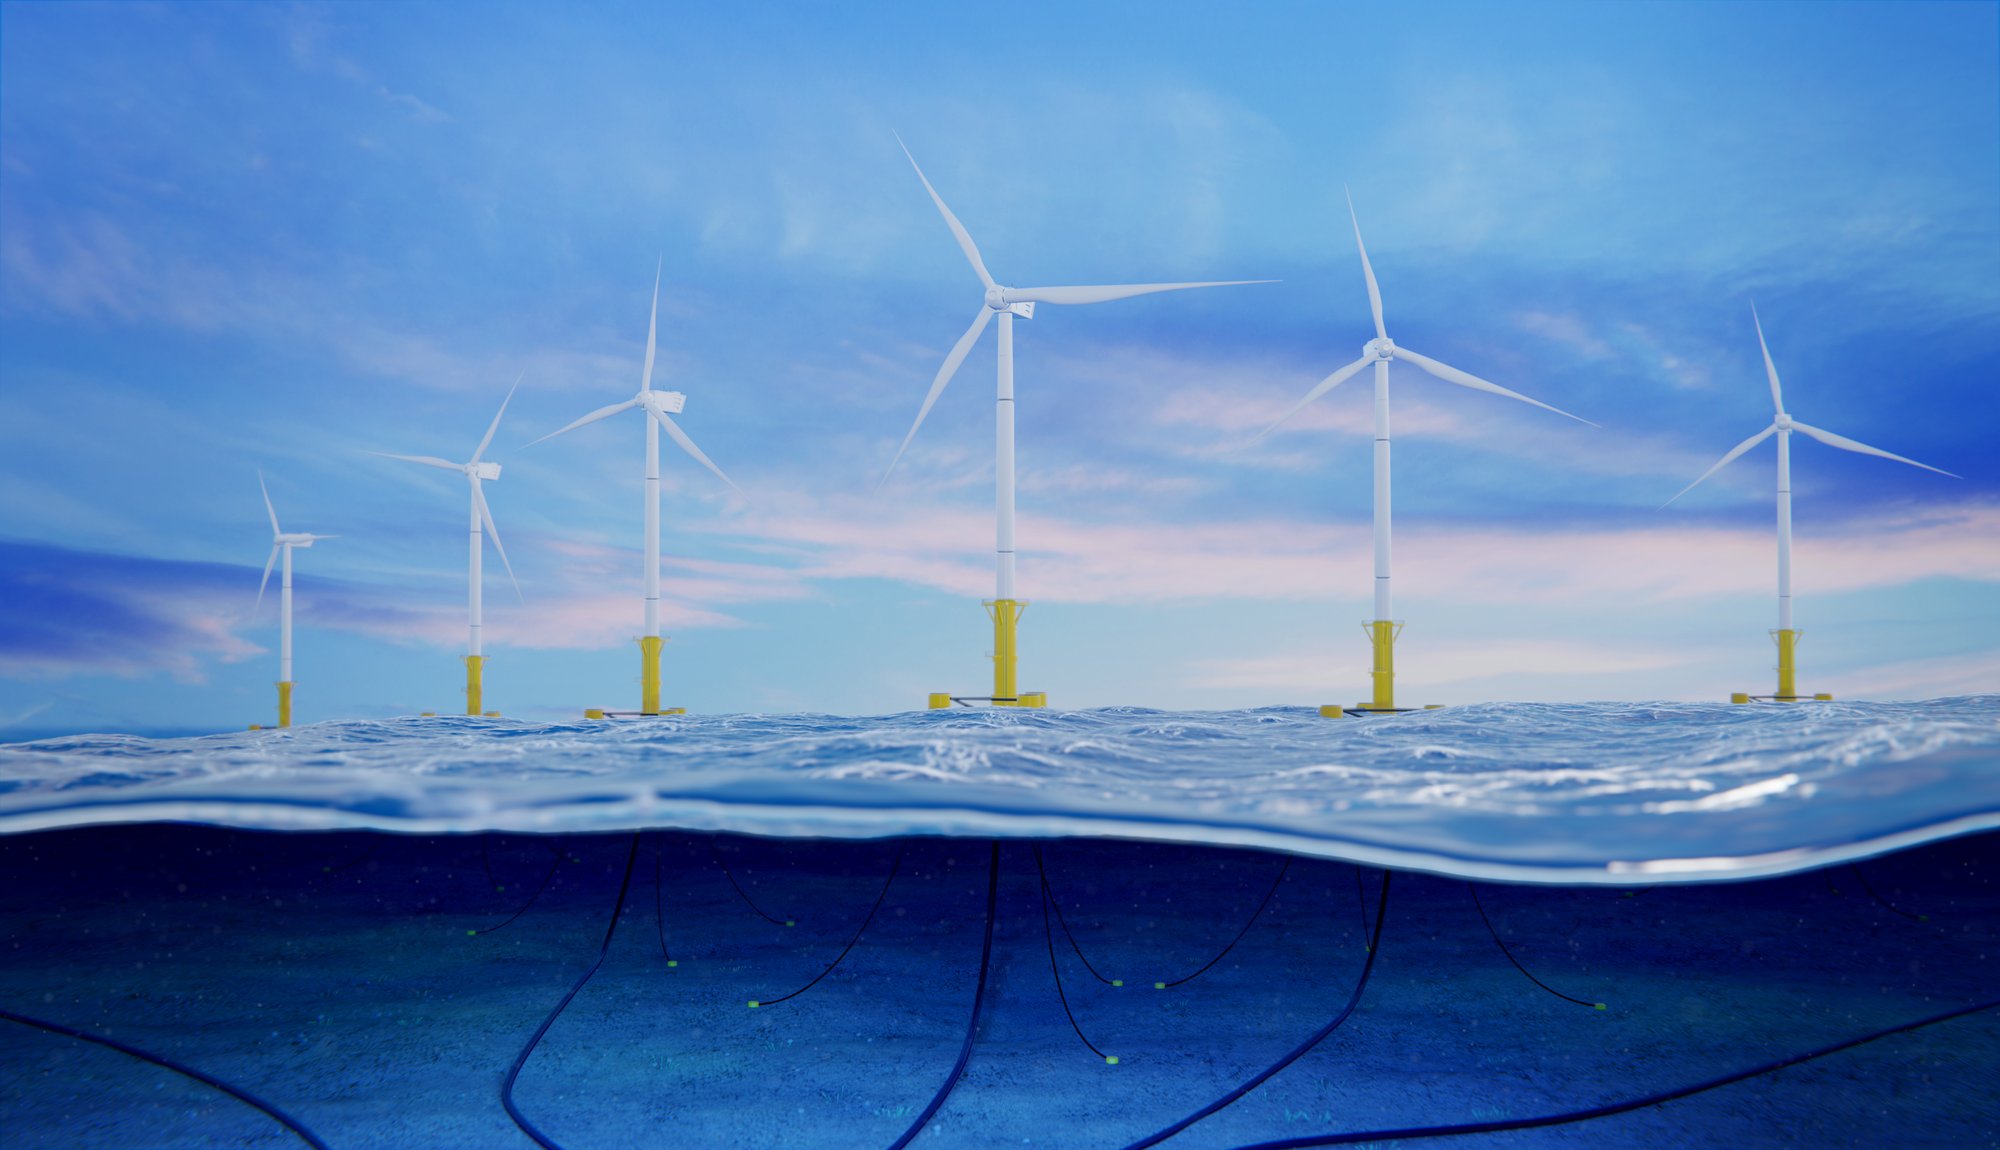 Sunset Offshore Wind Farm with Cables Image - 1